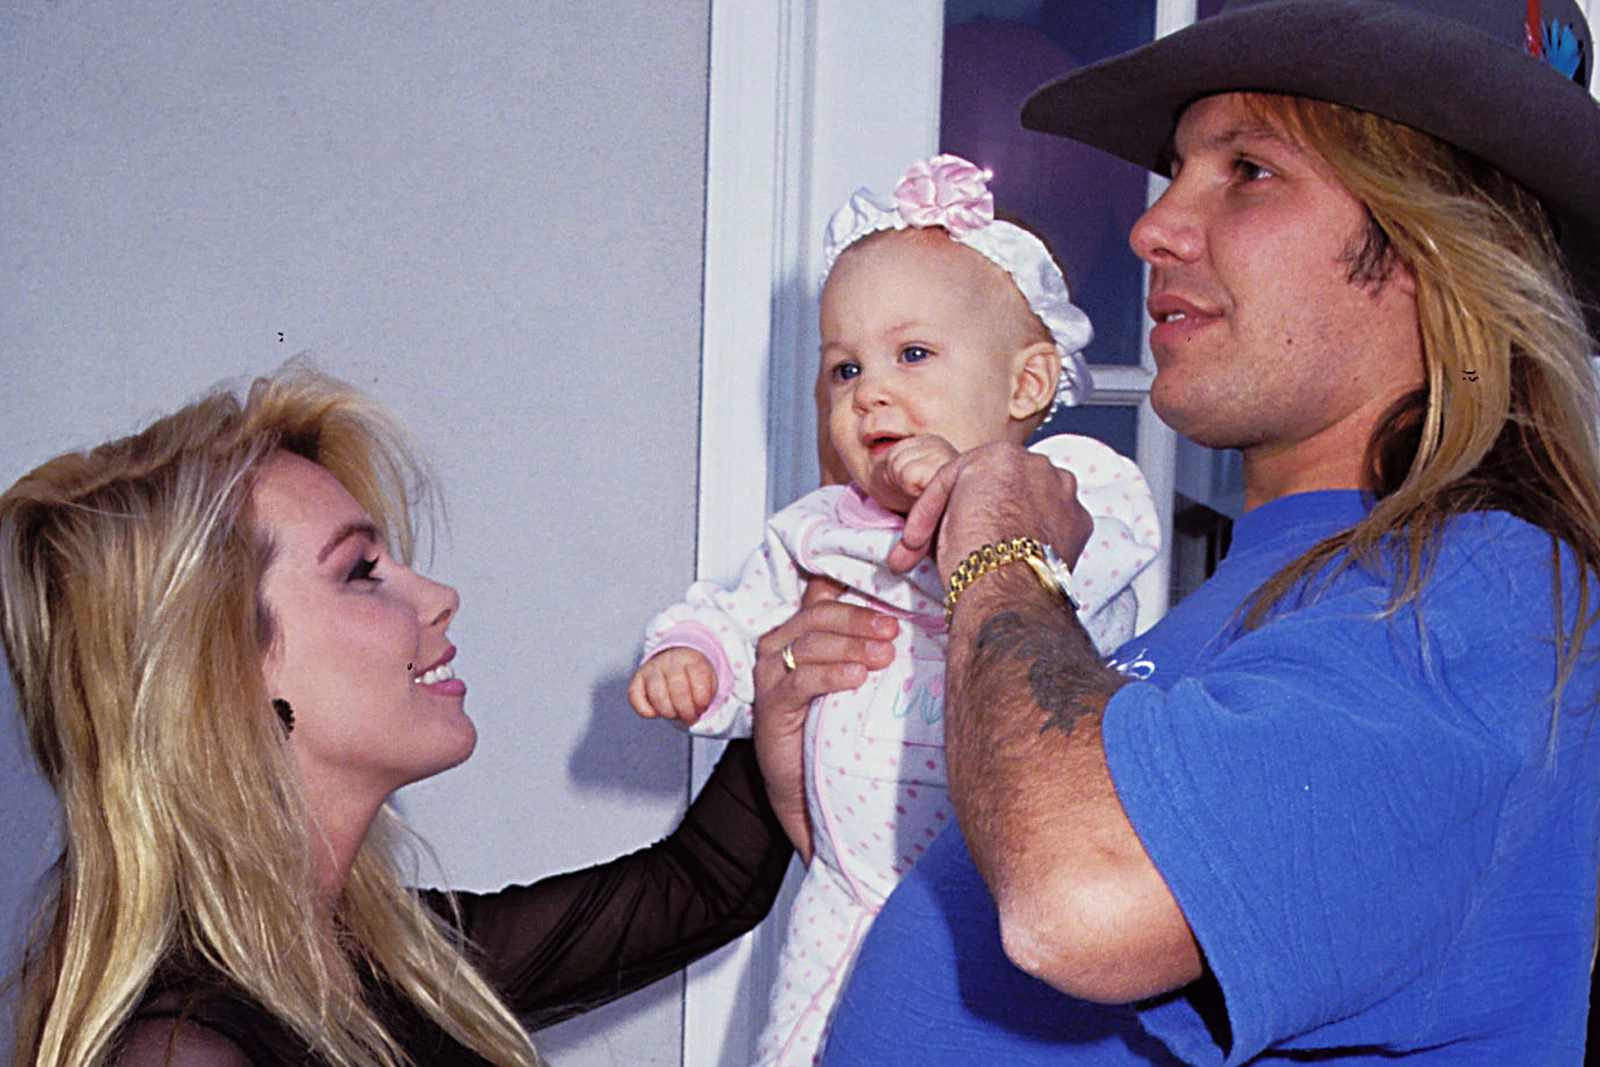 Mötley Crüe's Story Gets Told Through Vince Neil's Eyes and Ears